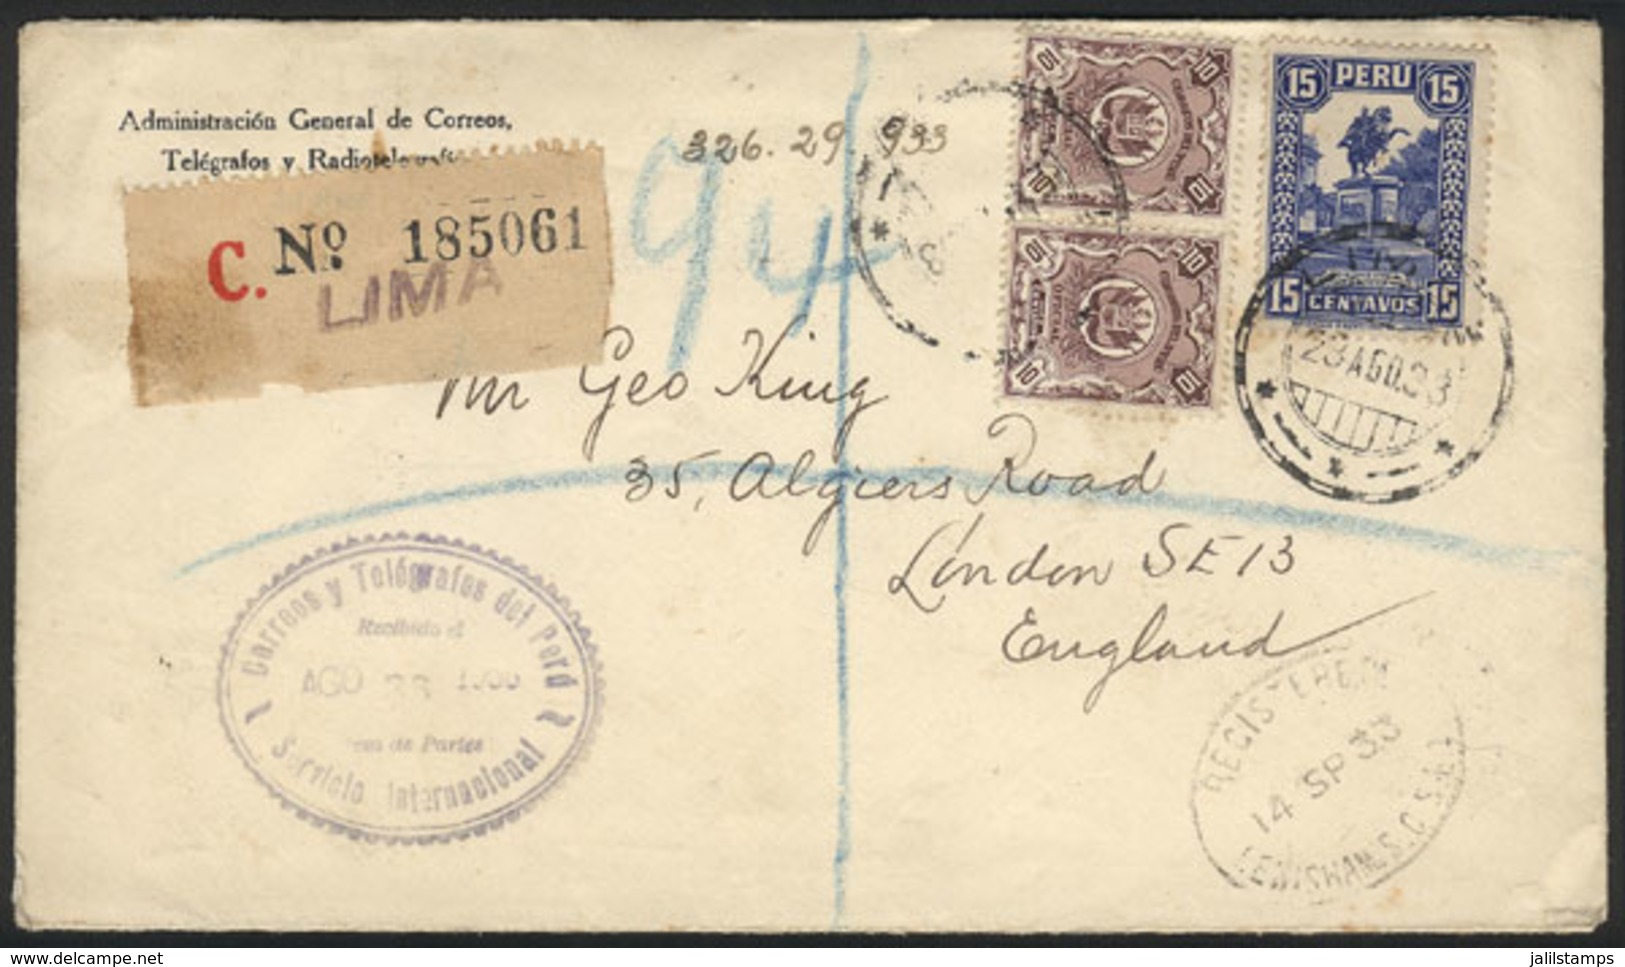 PERU: Registered Cover Of The General Post Office Administration, Sent To England On 23/AU/1933 With Mixed Postage For 3 - Peru